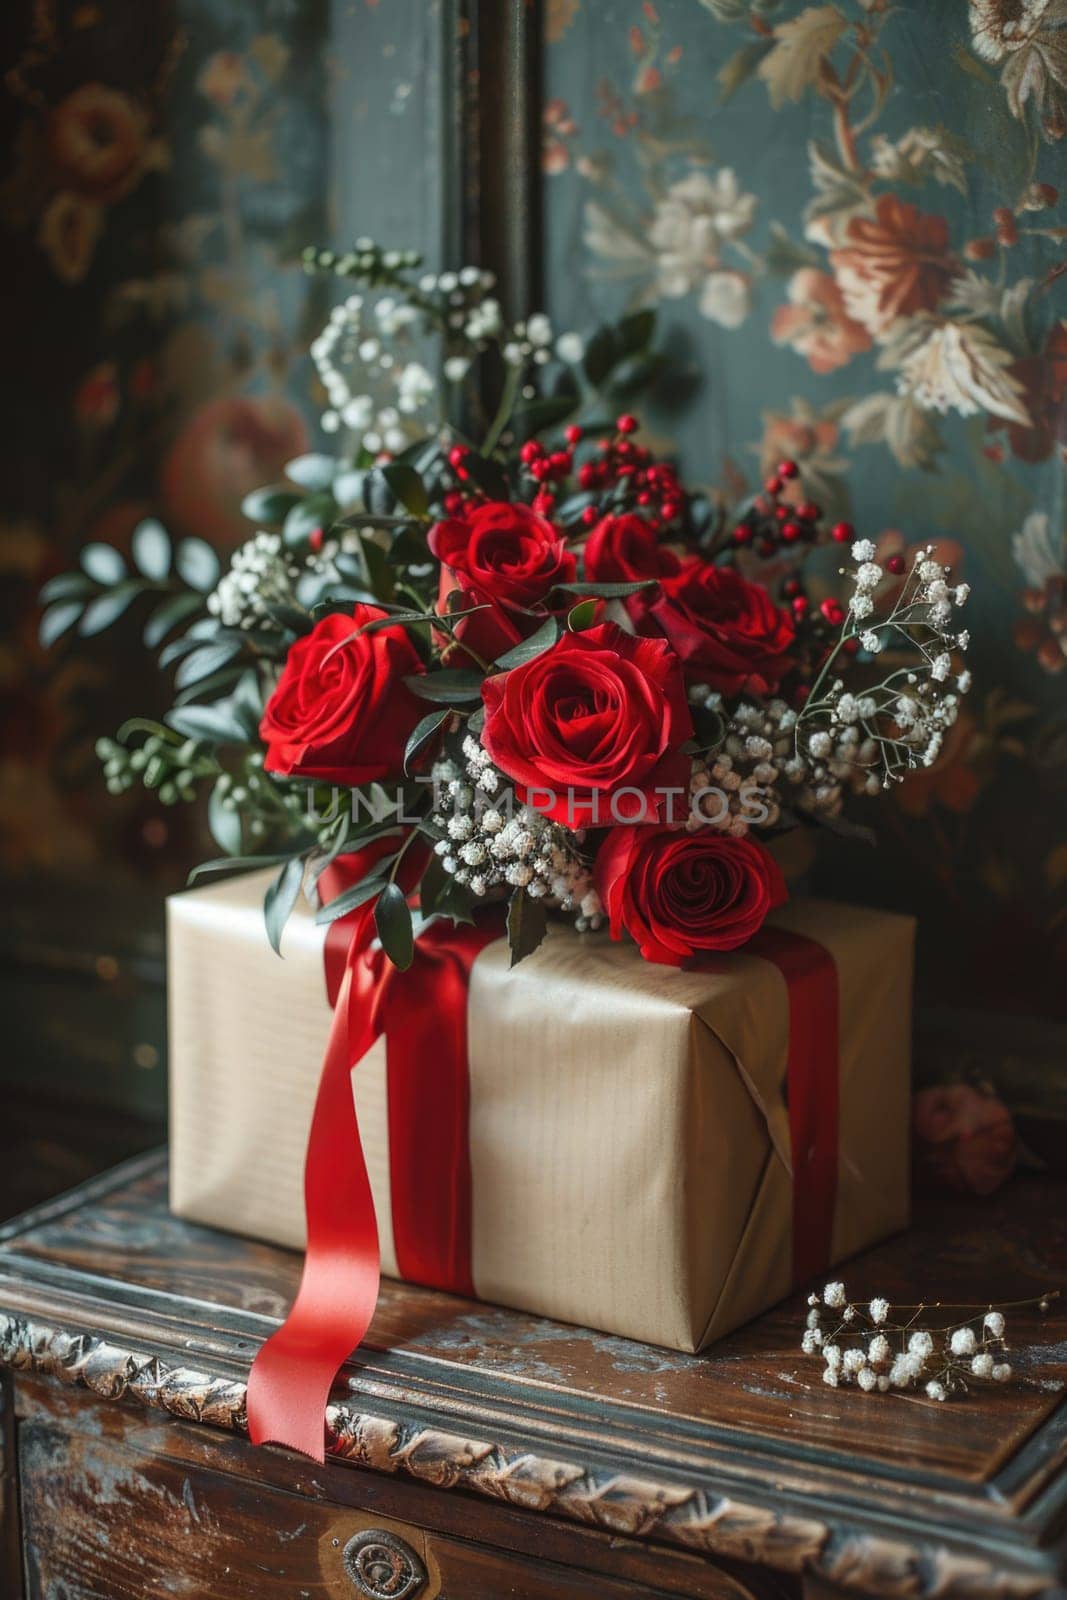 A gift box beautifully decorated with vibrant red roses and delicate babys breath flowers.